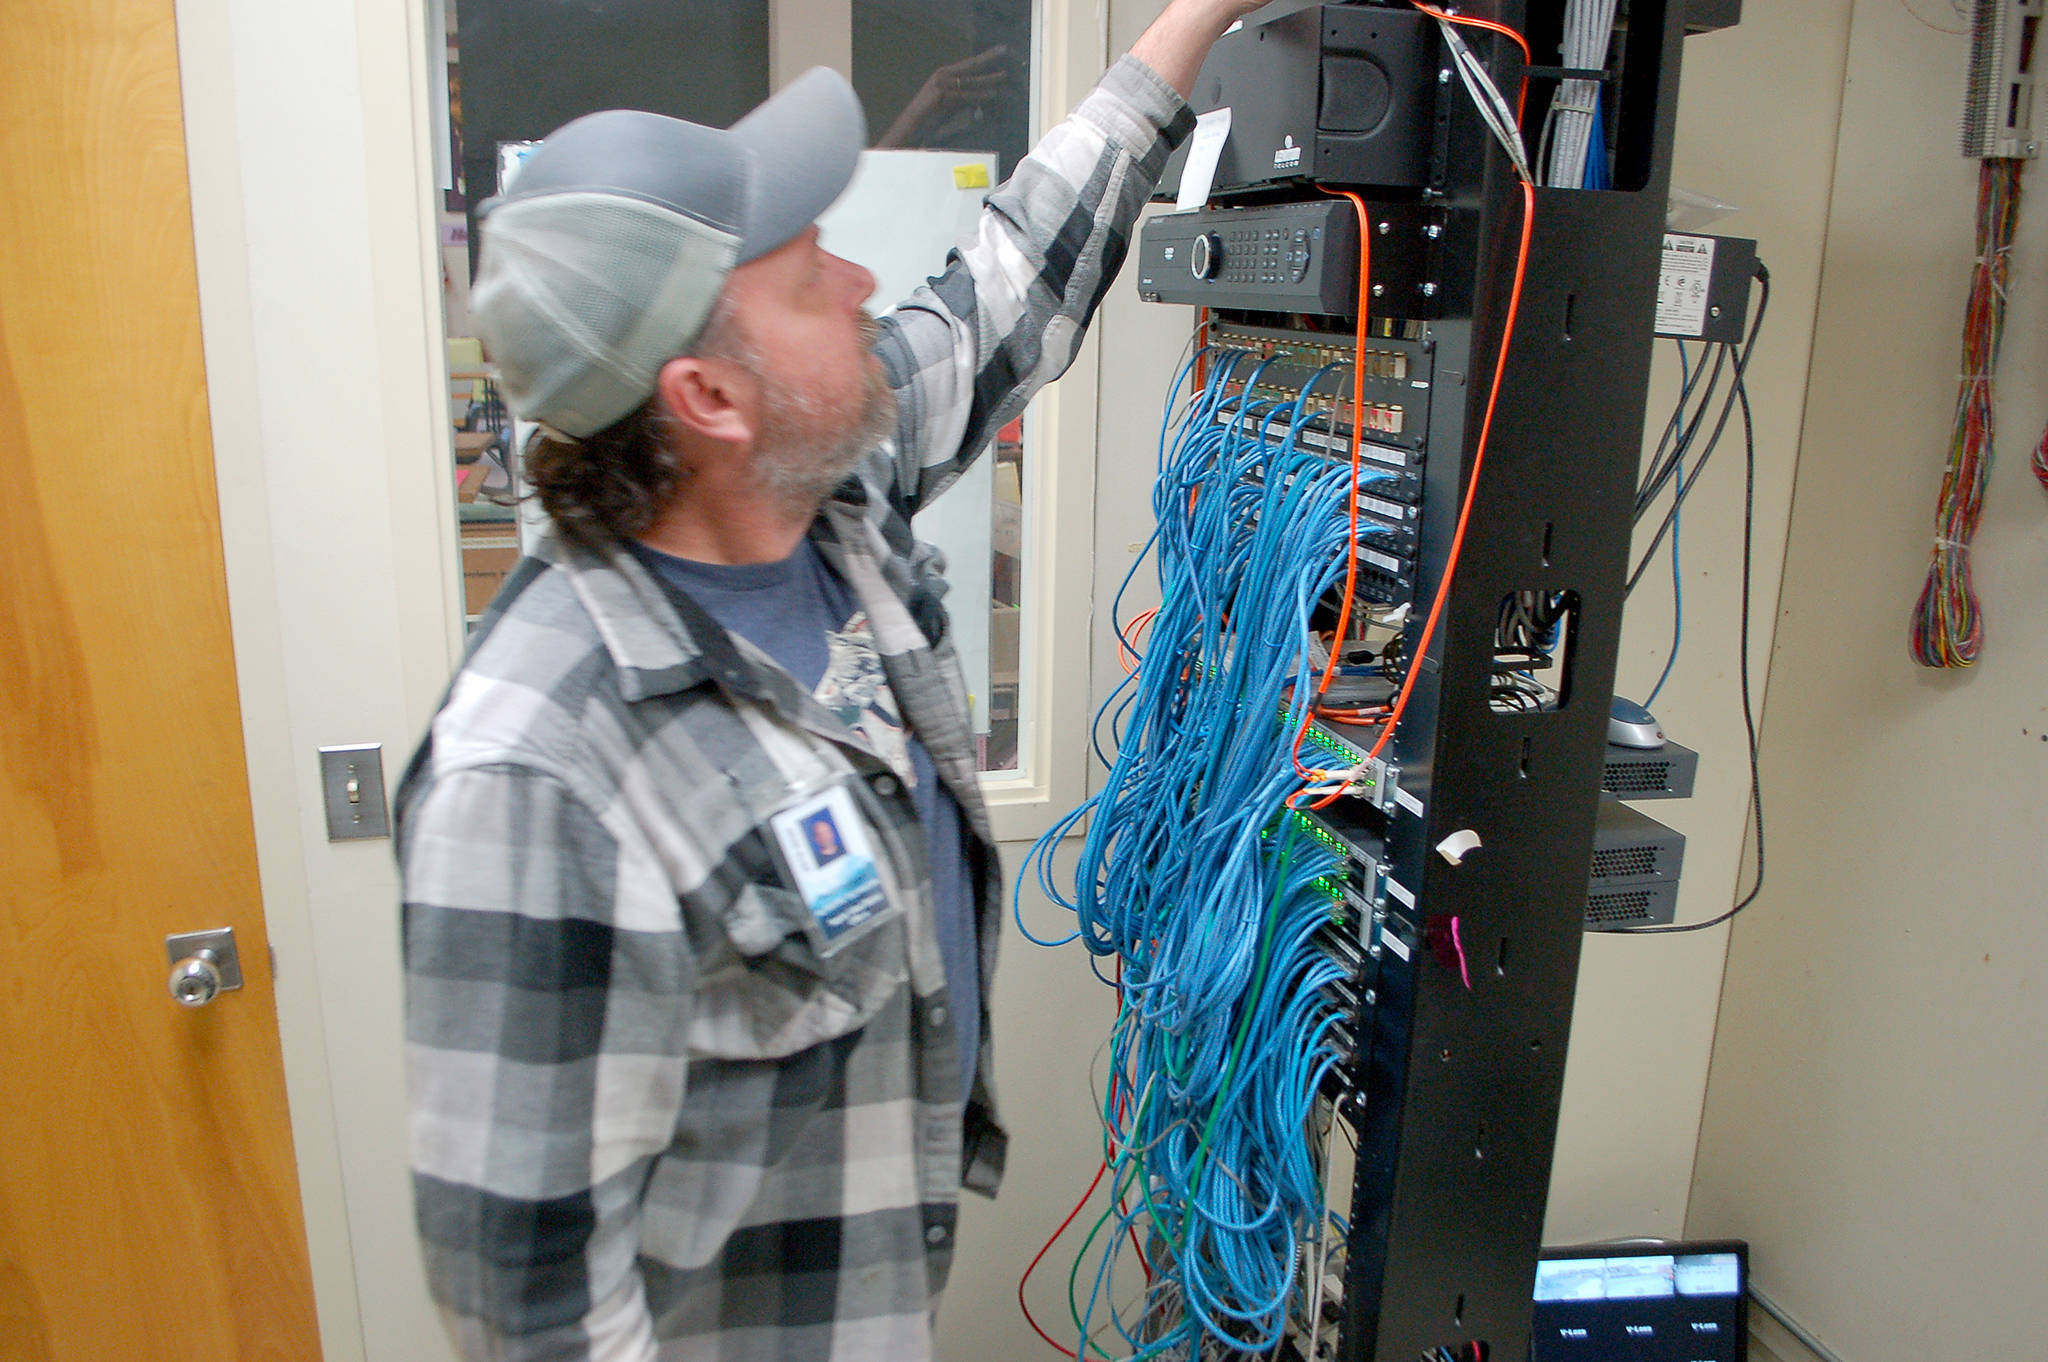 Sequim School District network technician Scott Harmsen checks on a network distribution point in the Sequim High School library. Sequim Gazette photo by Conor Dowley